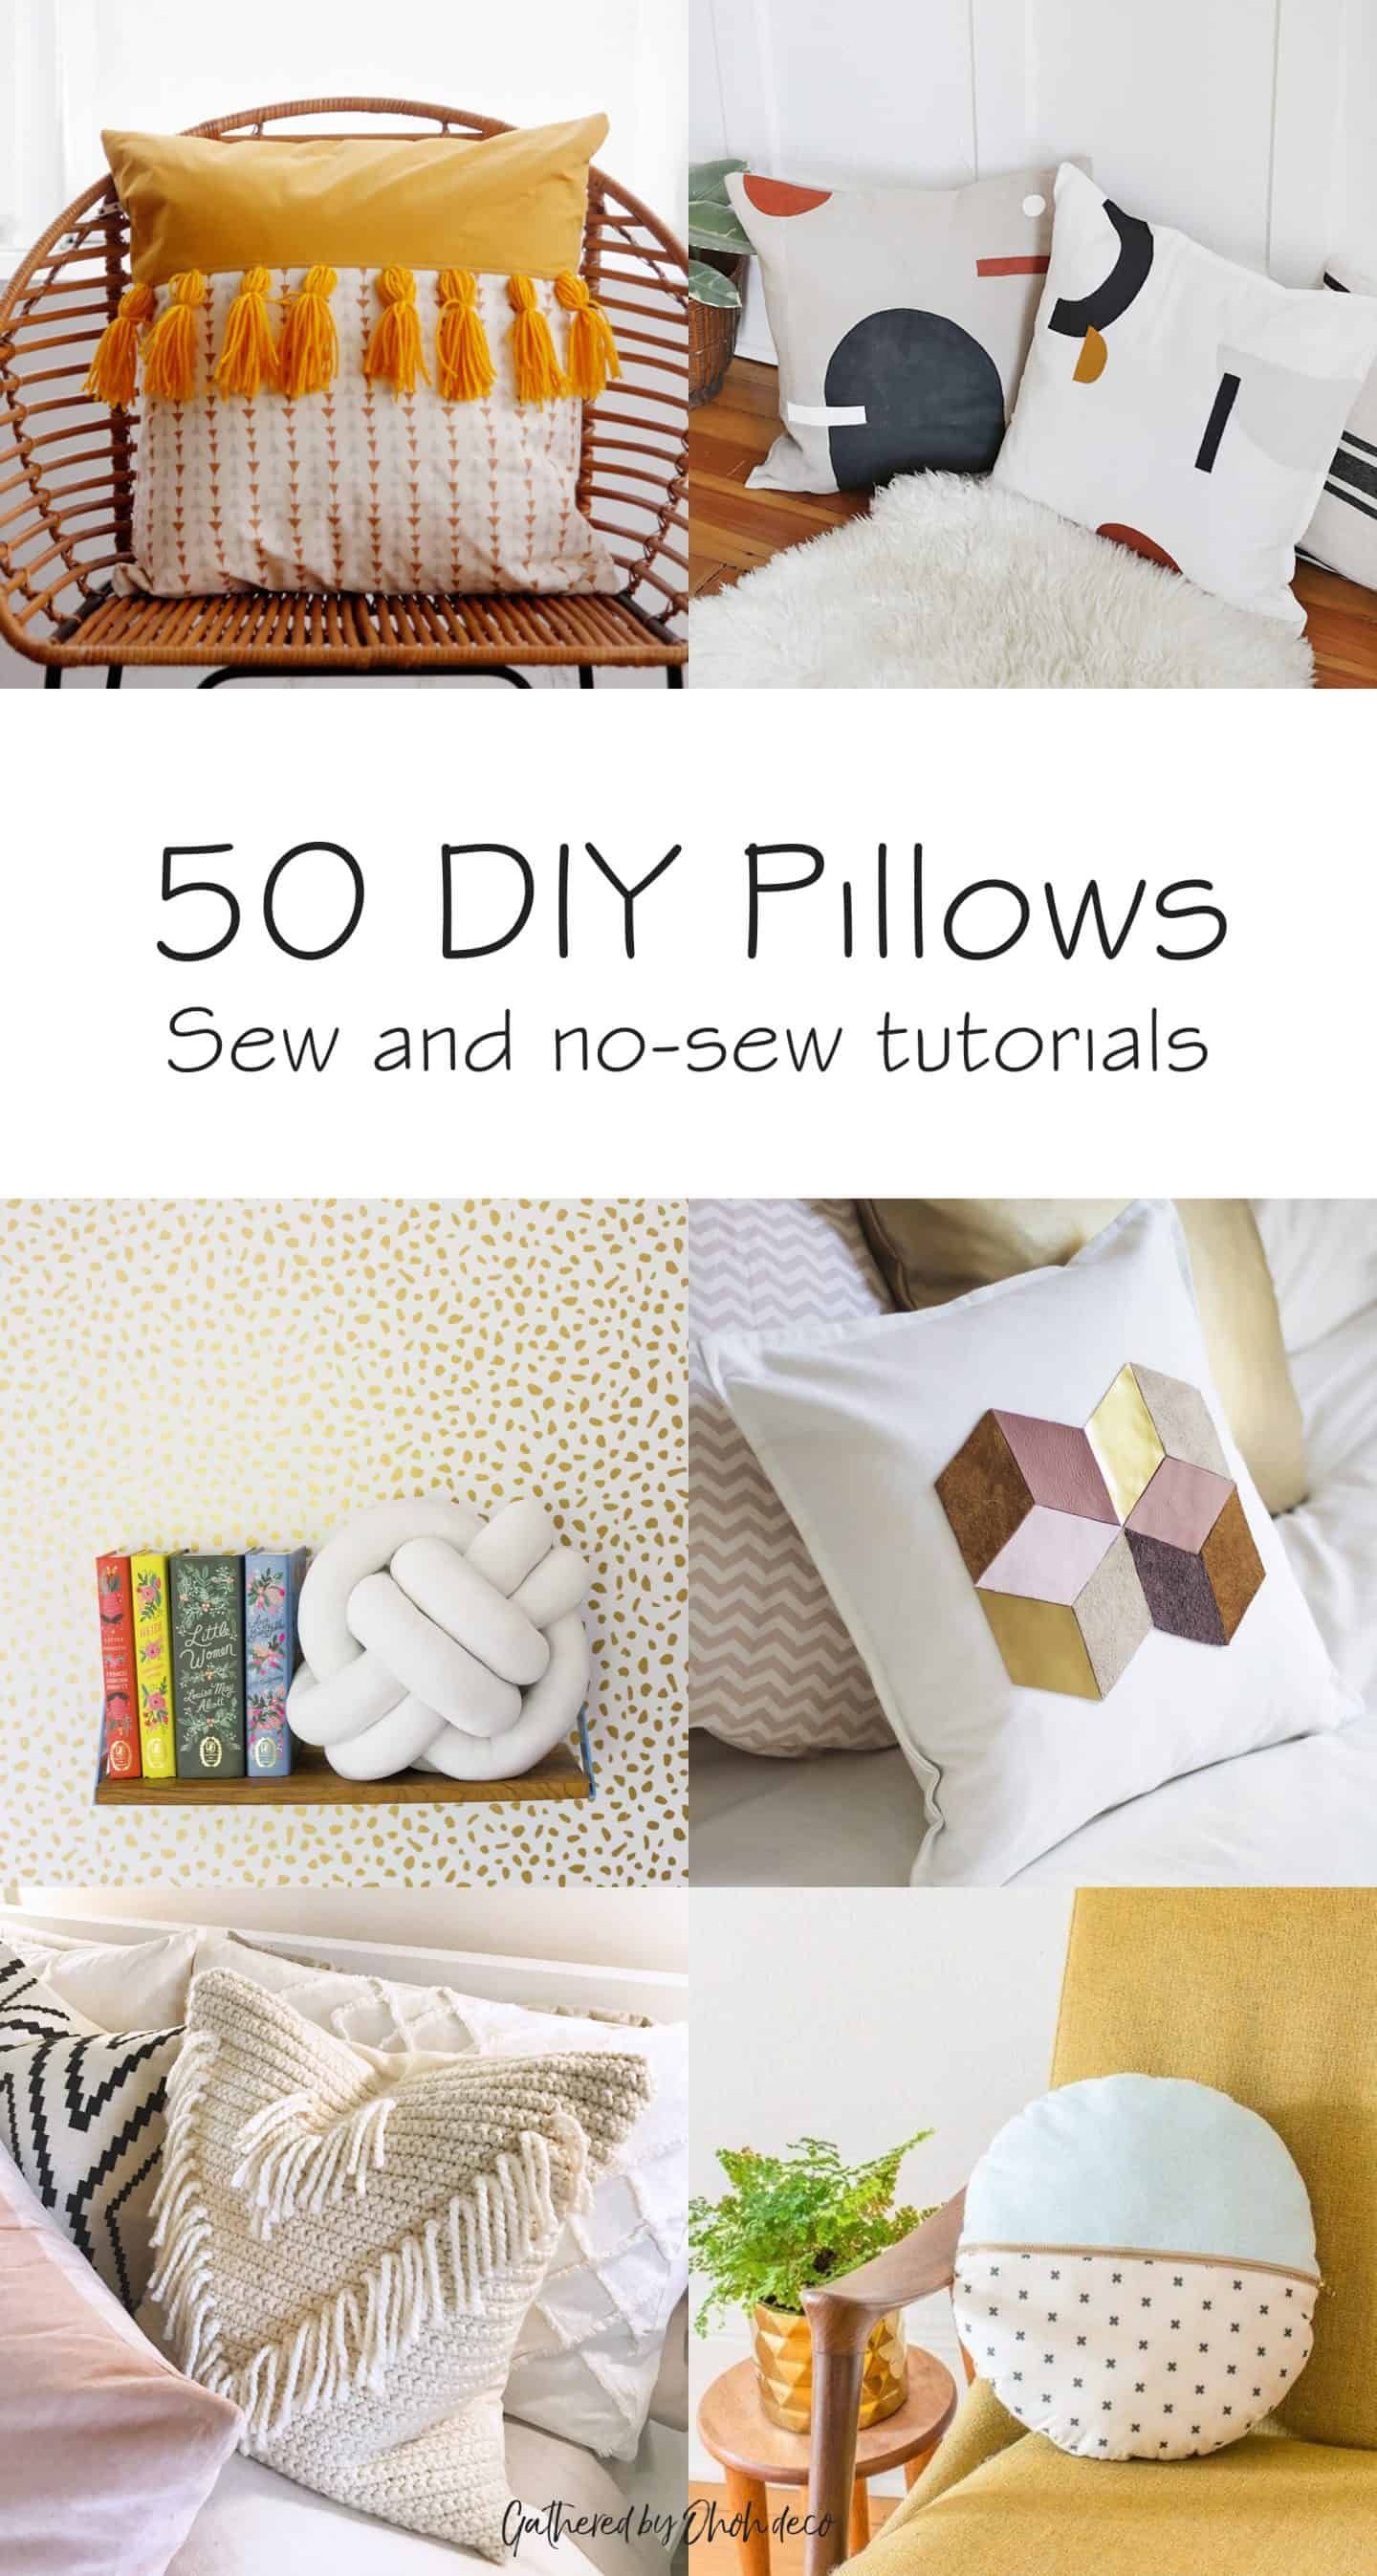 50 DIY pillows to jazz up your decor - Ohoh deco -   18 diy projects Sewing throw pillows ideas